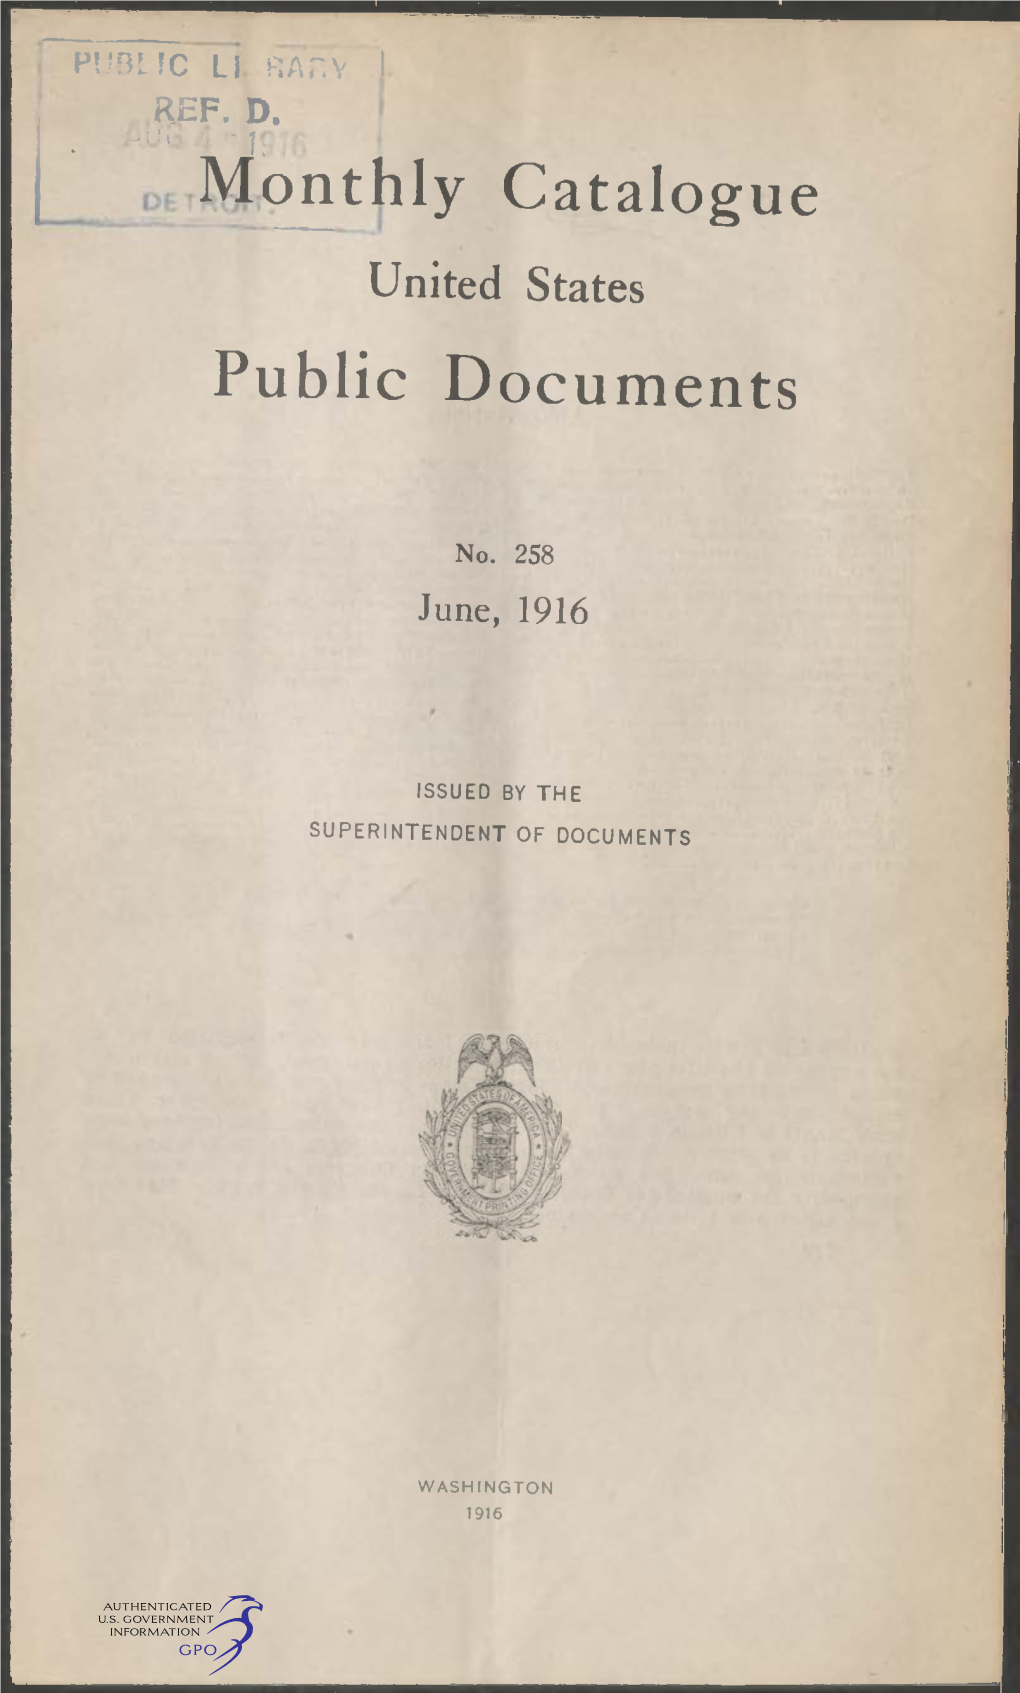 Monthly Catalogue, United States Public Documents, June 1916